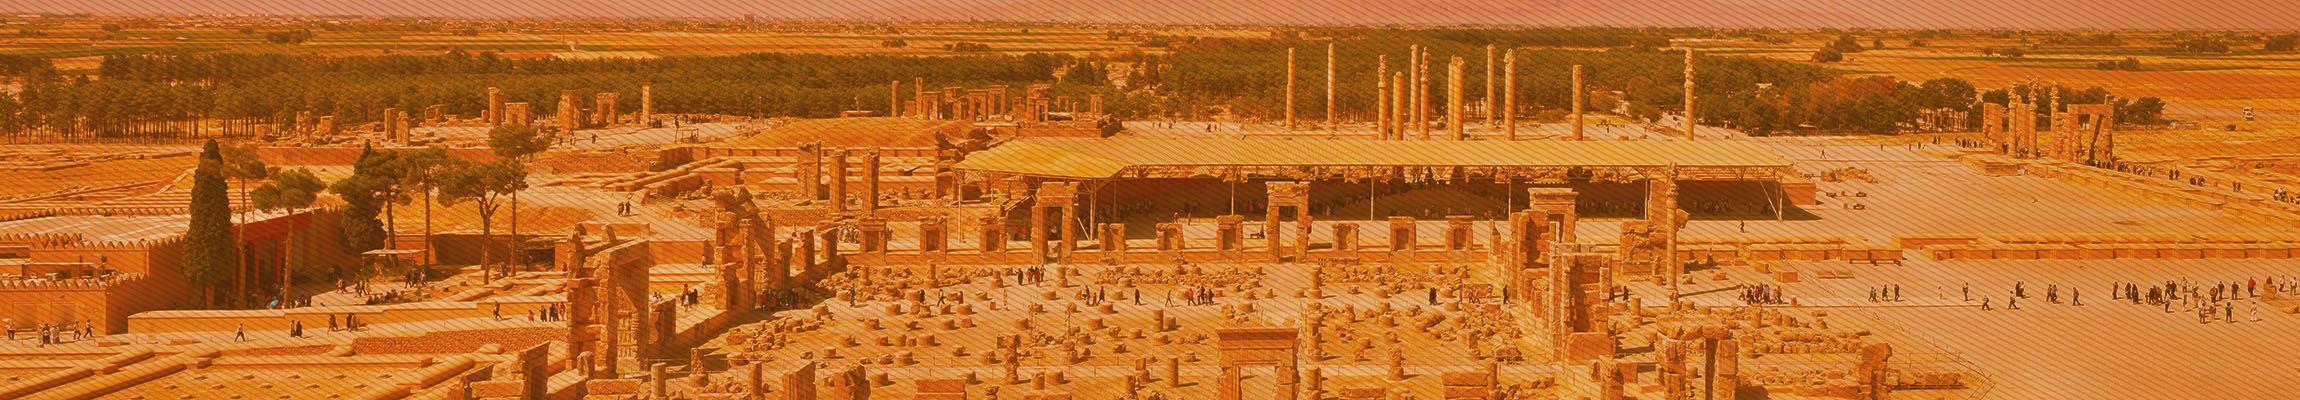 Ancient Persepolis: The ceremonial capital of the Persian Empire